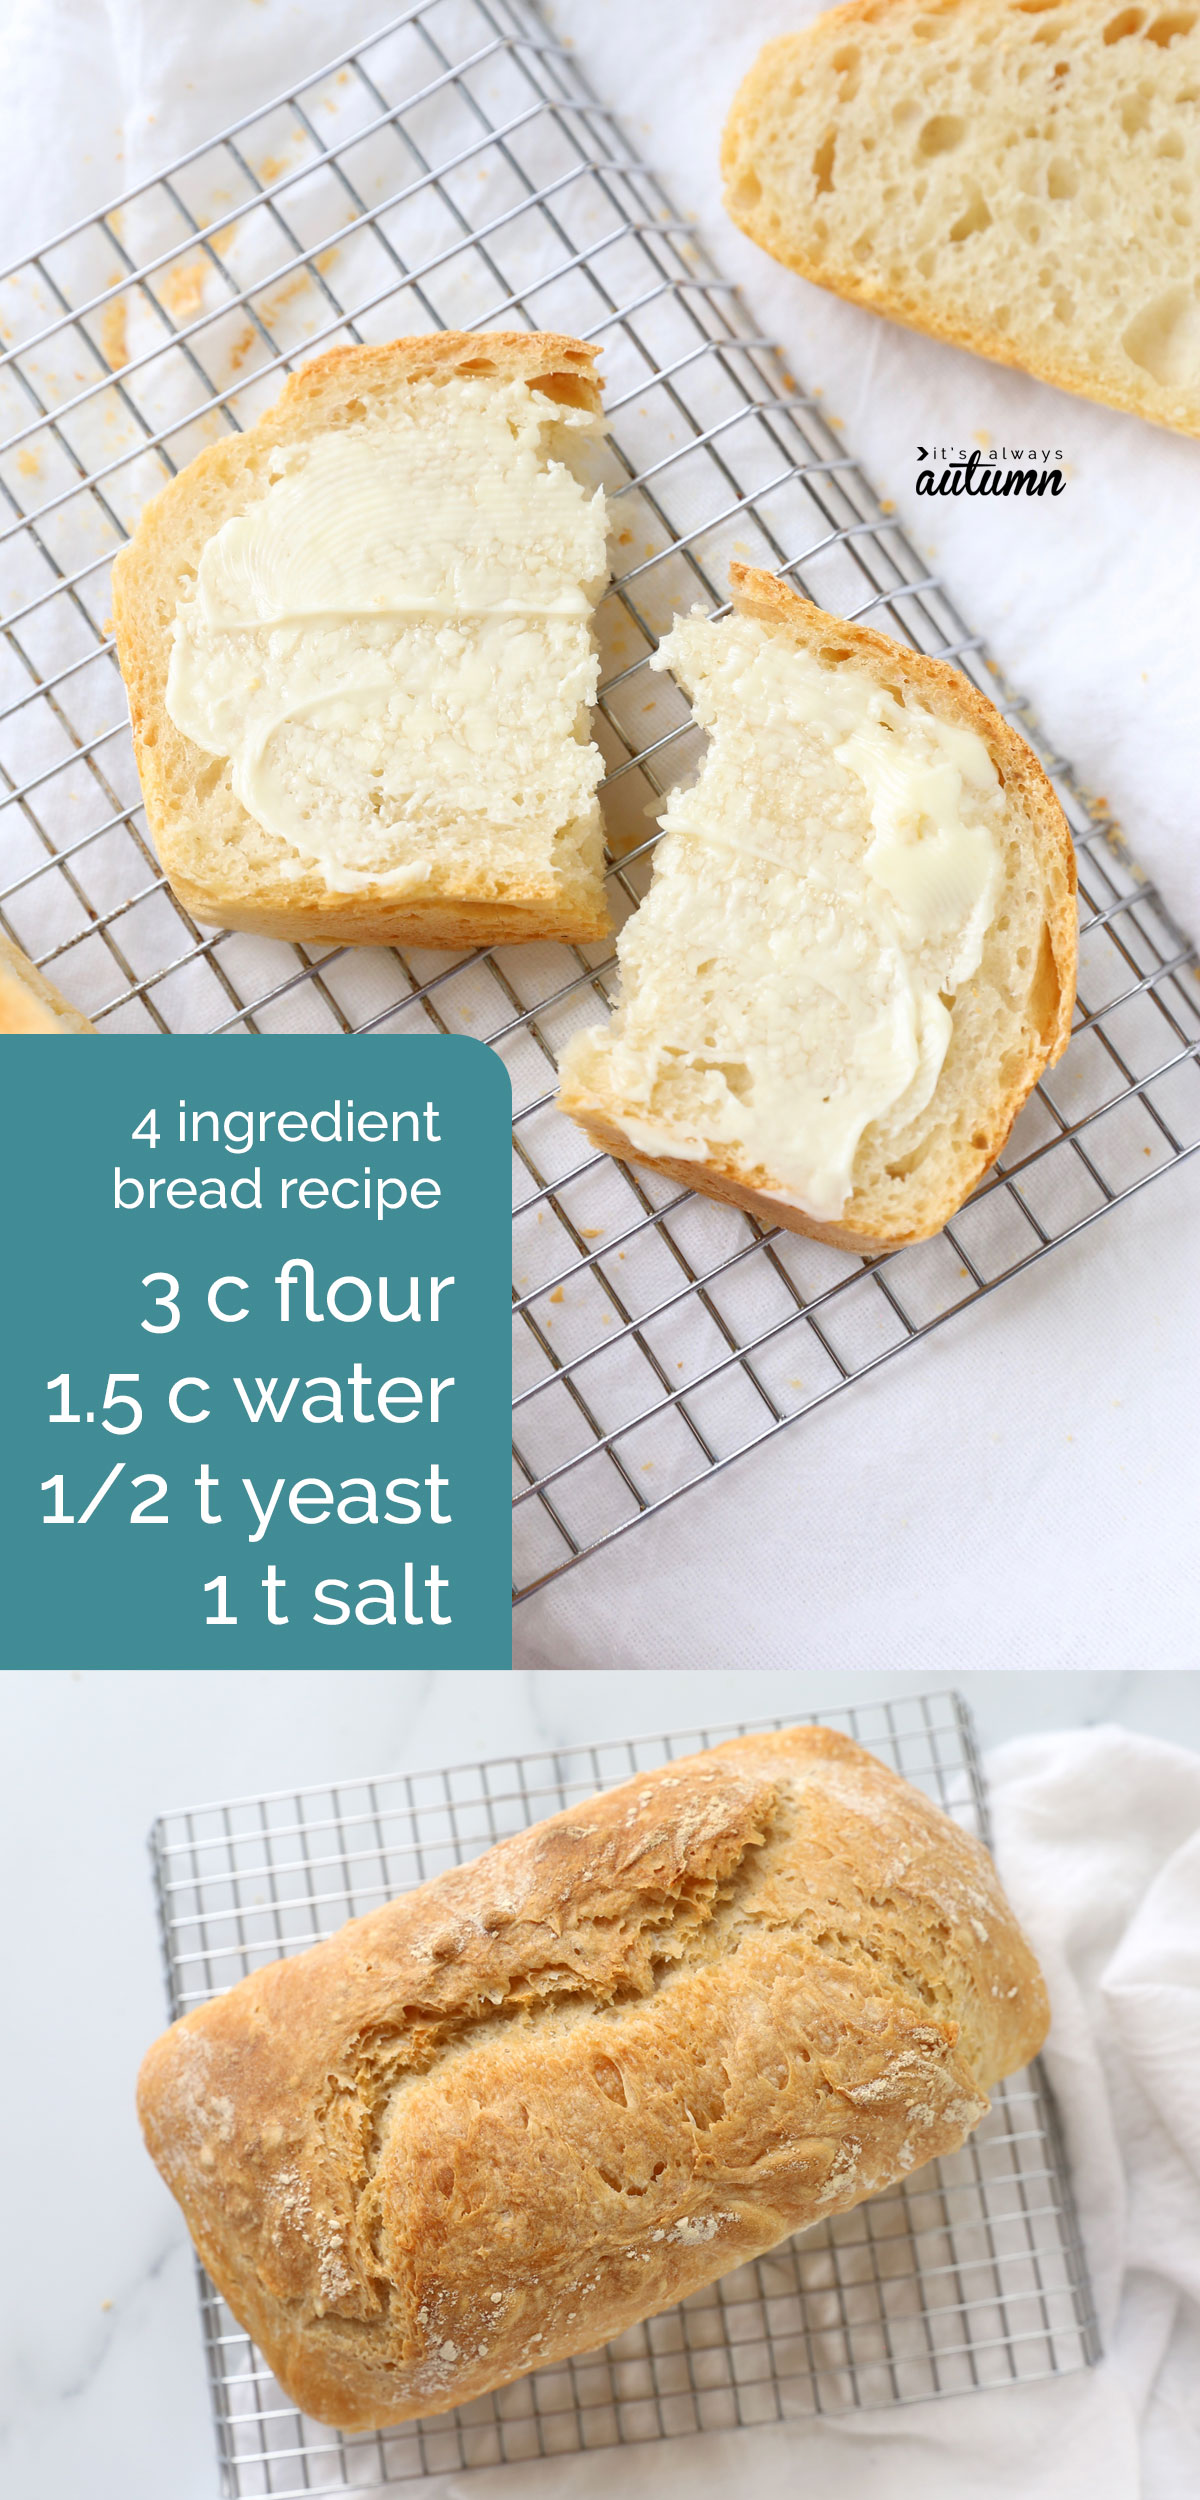 This easy bread recipe only require flour, salt, yeast, and water! All you have to do is stir, rise, and bake.